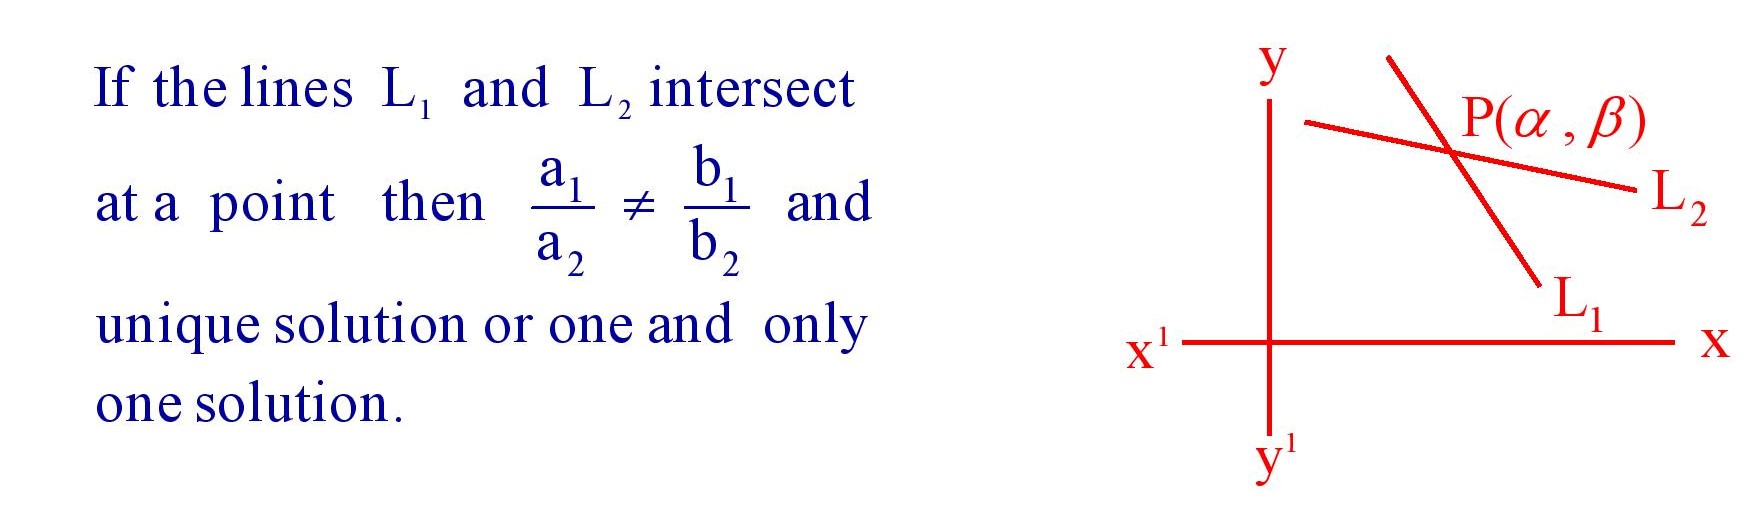 If two lines intersect at a point